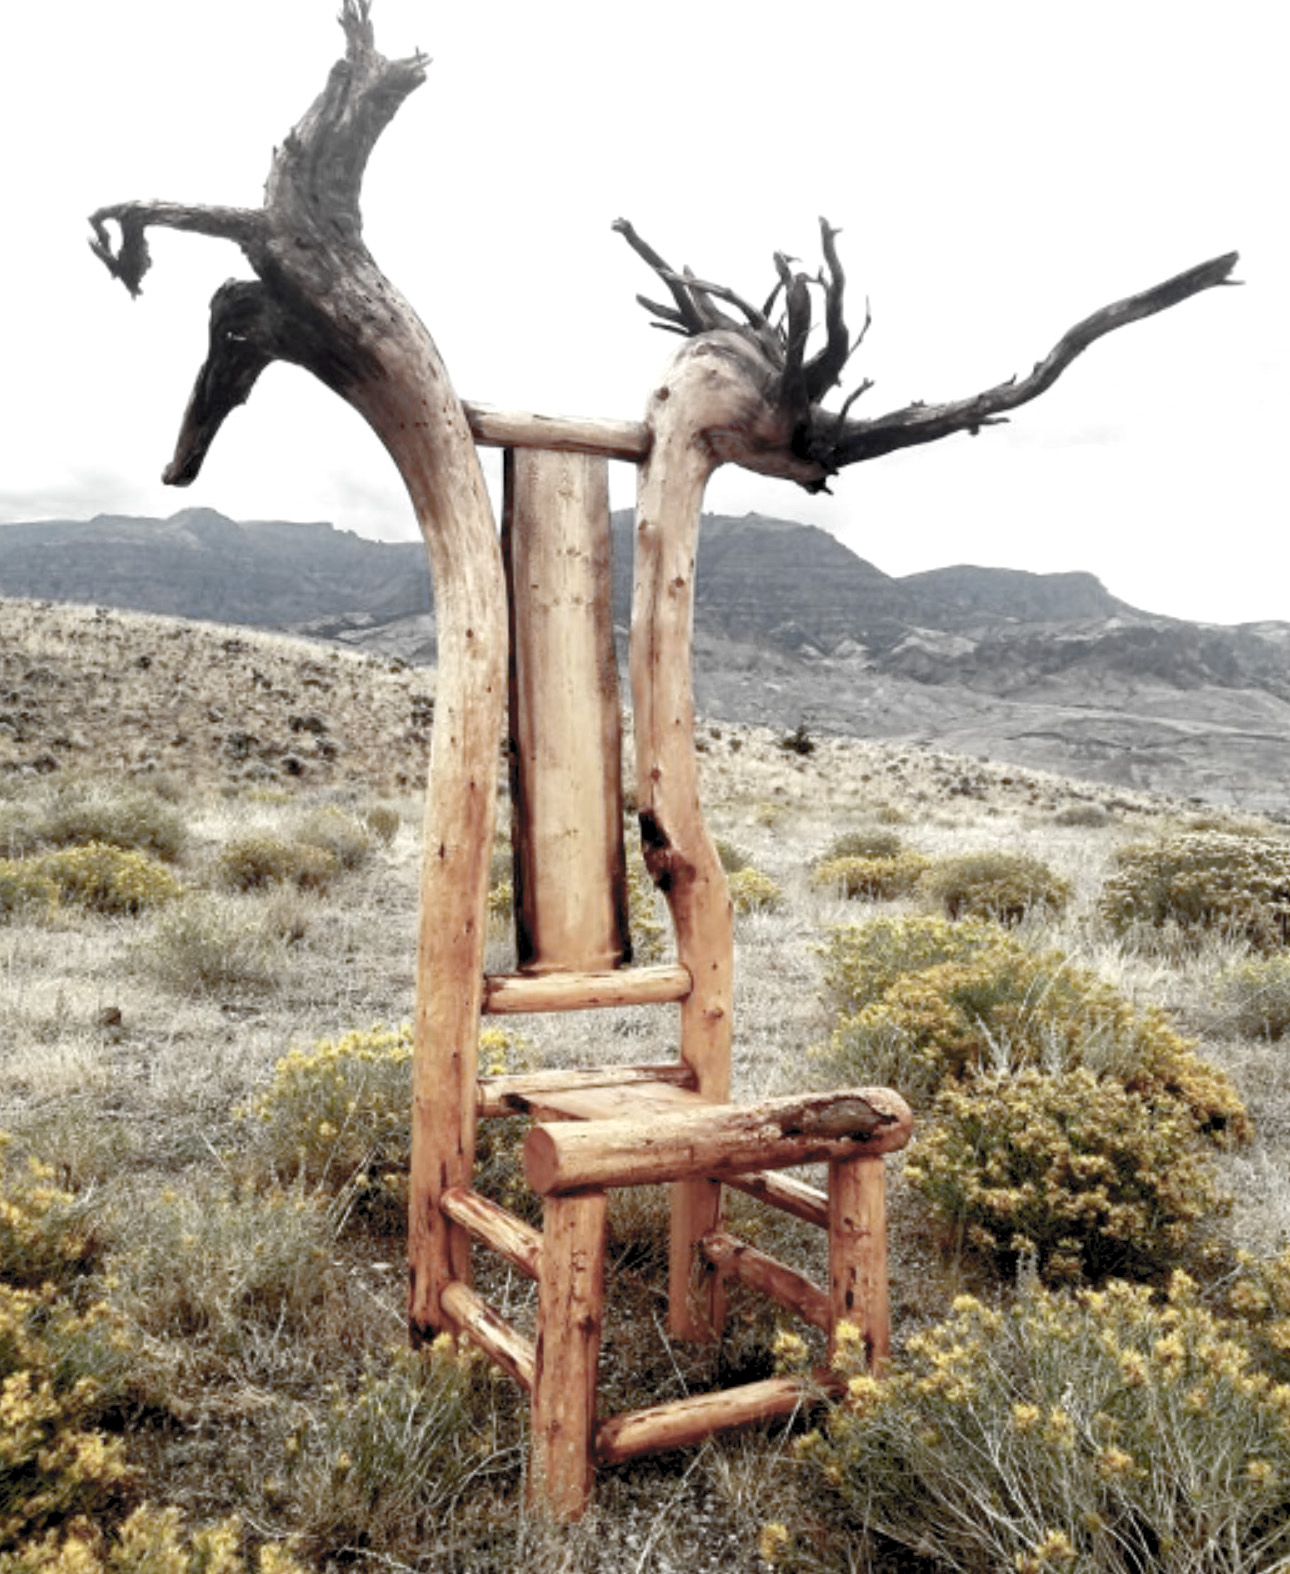  Aspen Throne Commissioned for a Haunted Halloween Maze in Wapiti, WY 2015 